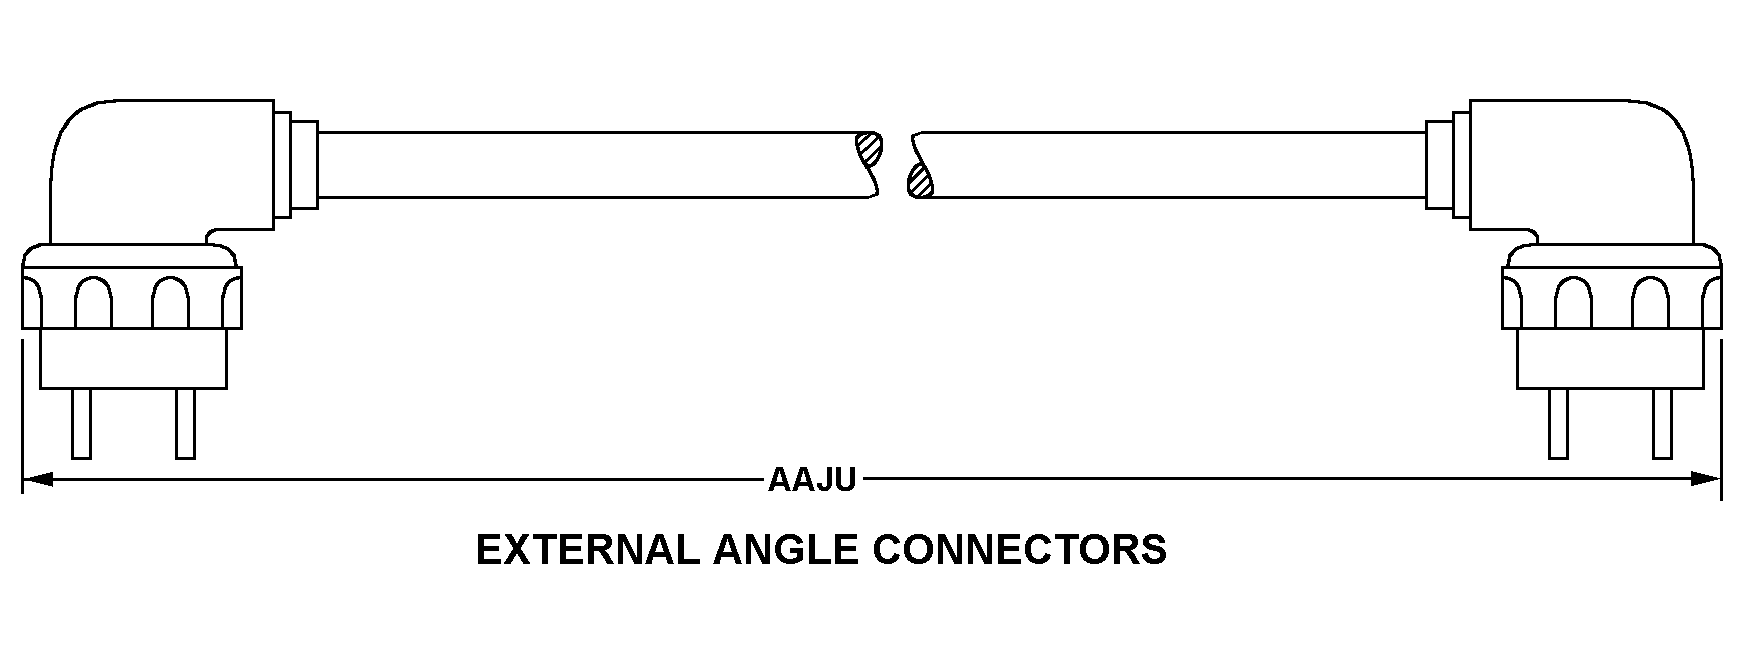 EXTERNAL ANGLE CONNECTORS style nsn 5995-01-333-6567